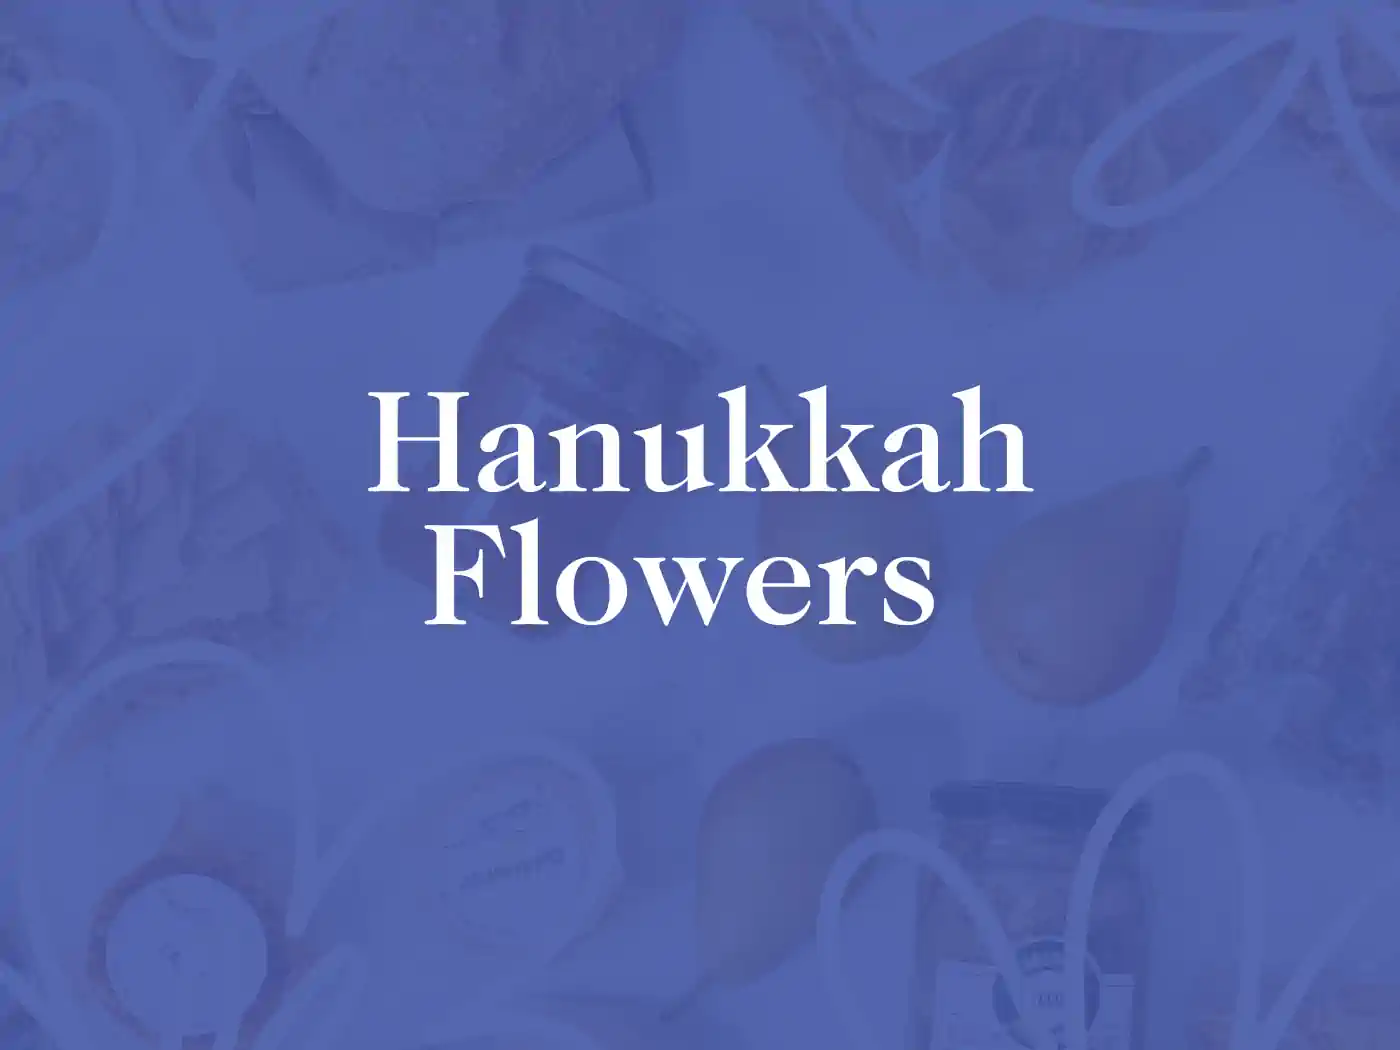 A text graphic with the words "Hanukkah Flowers" in the centre, featuring a soft blue background and various food items faintly visible in the background. Fabulous Flowers and Gifts - Hanukkah Flowers.